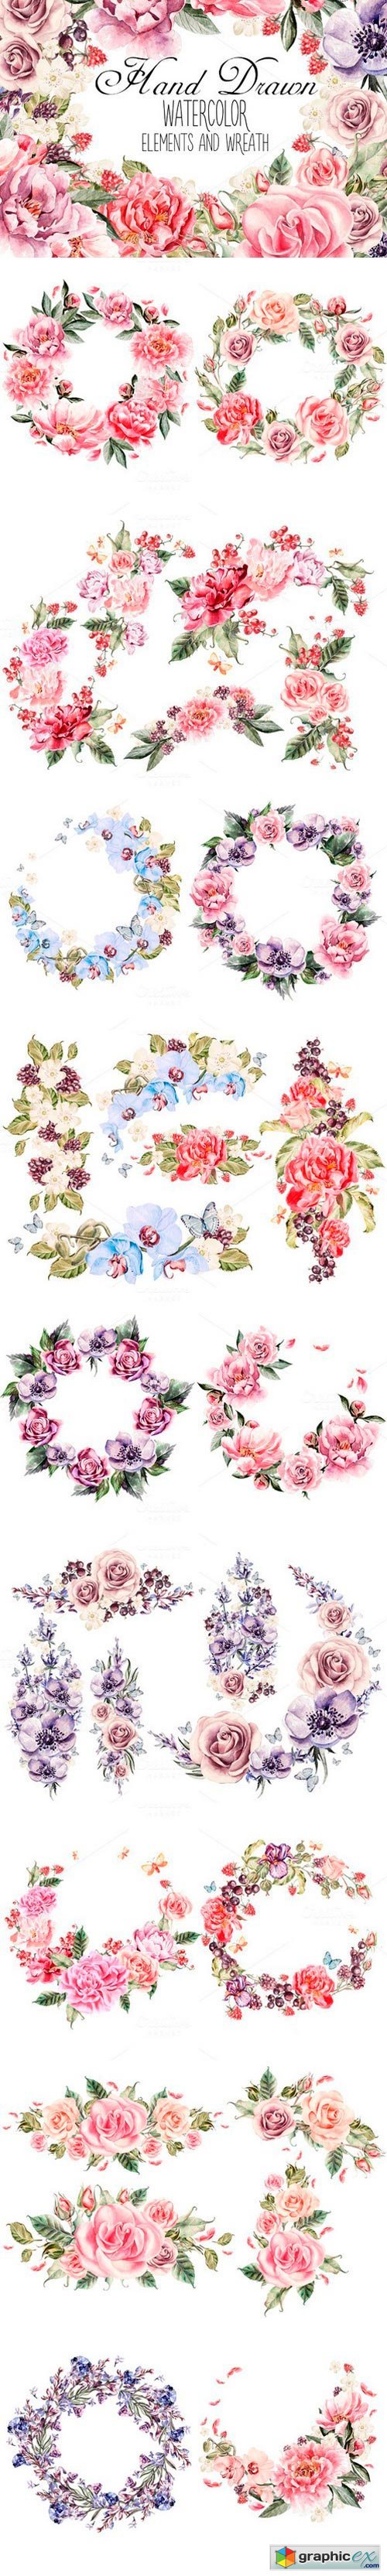 watercolor ELEMENTS and WREATH